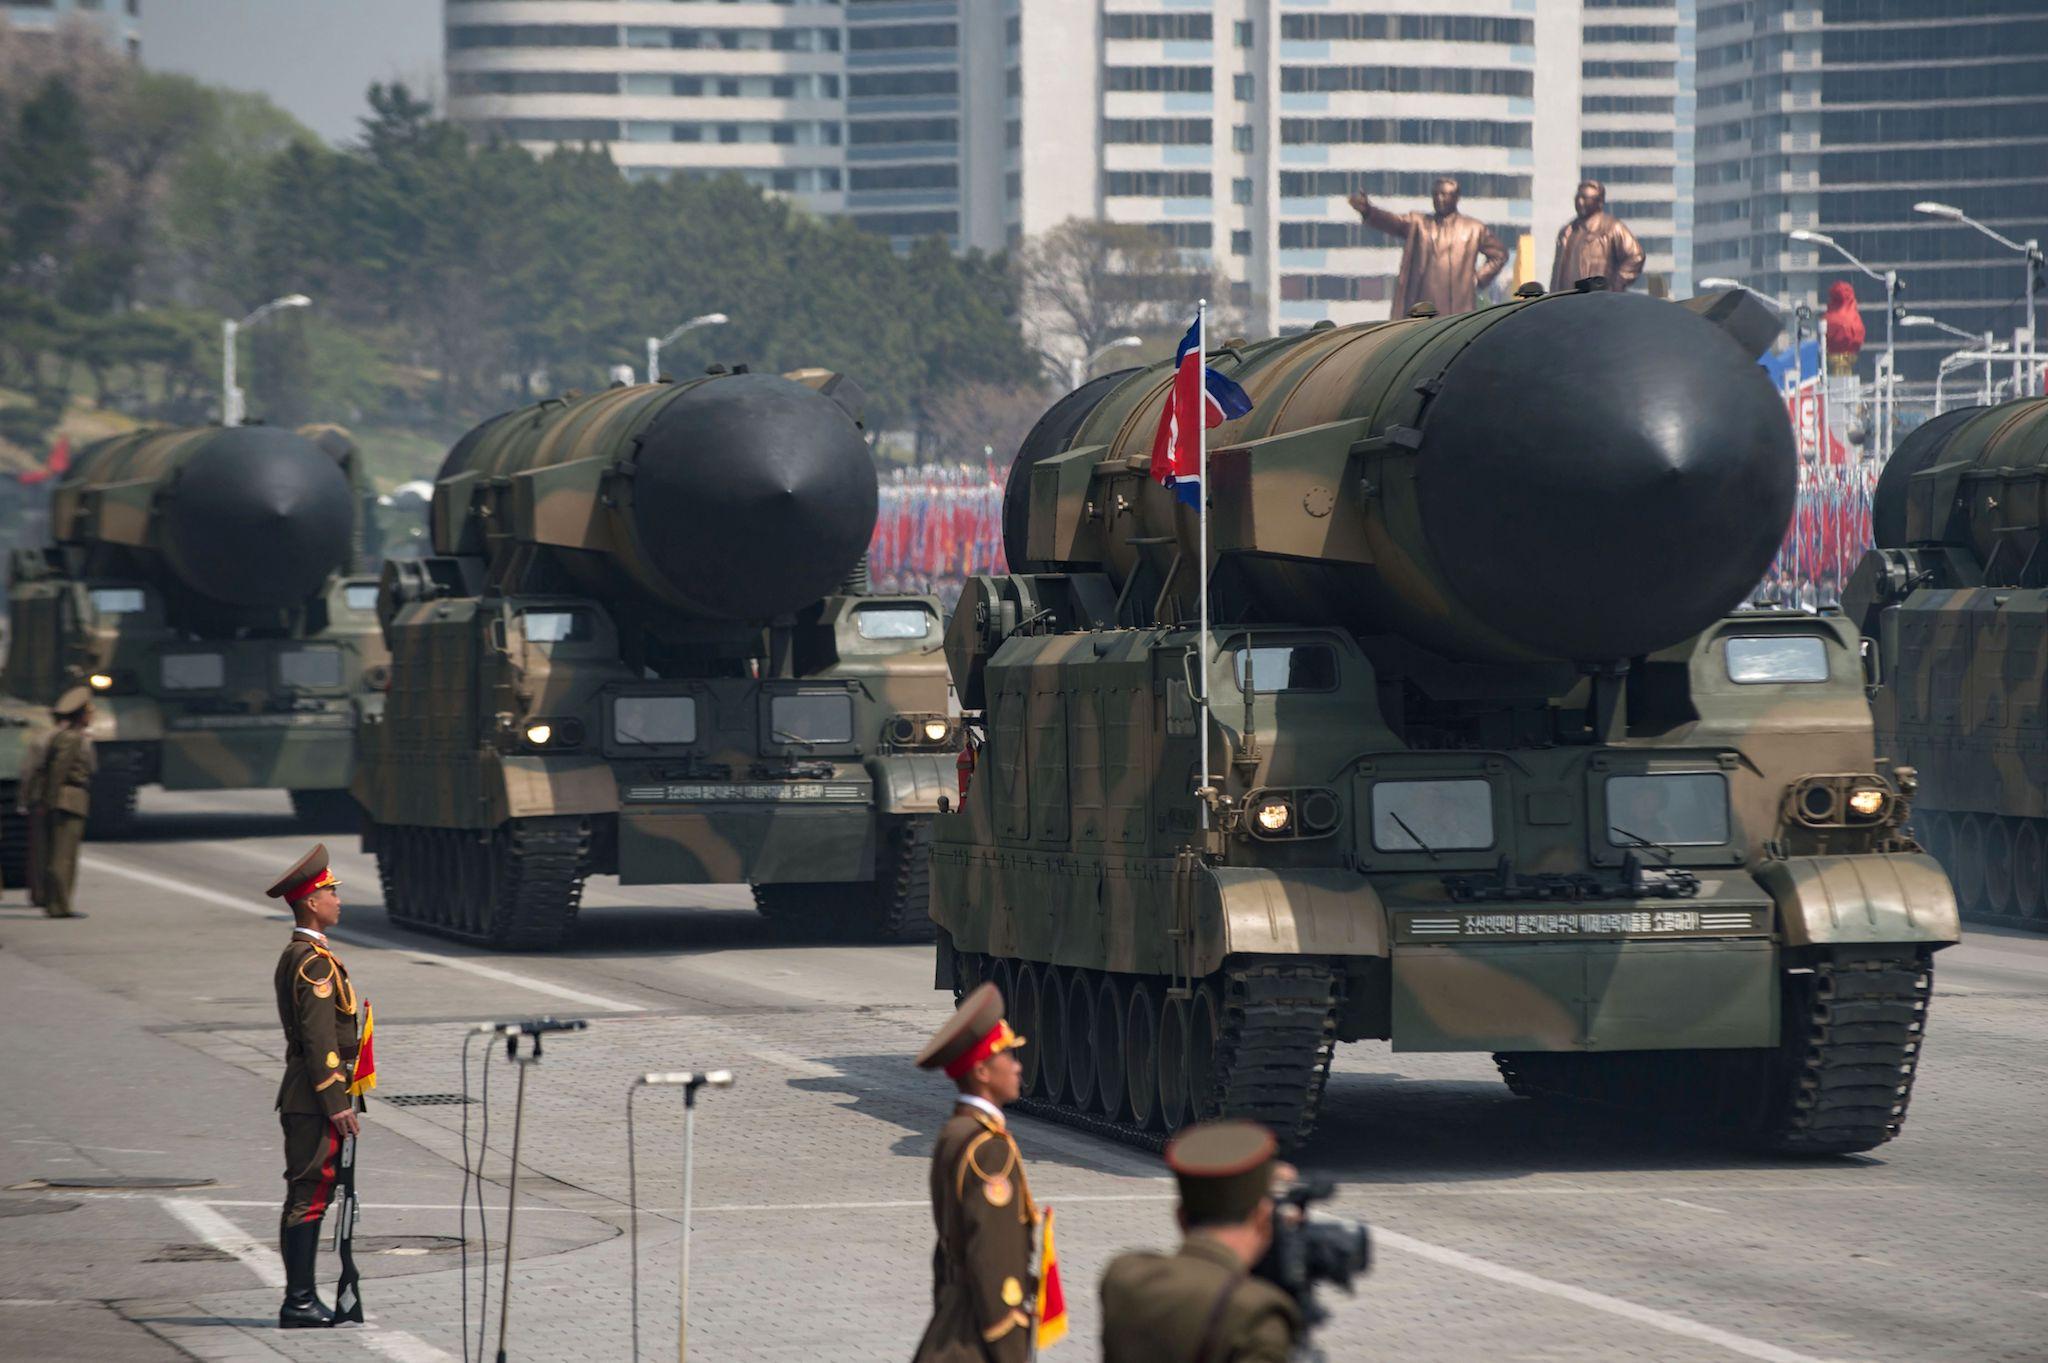 An unidentified rocket is displayed during a military parade marking the 105th anniversary of the birth of late North Korean leader Kim Il-Sung in Pyongyang on April 15, 2017